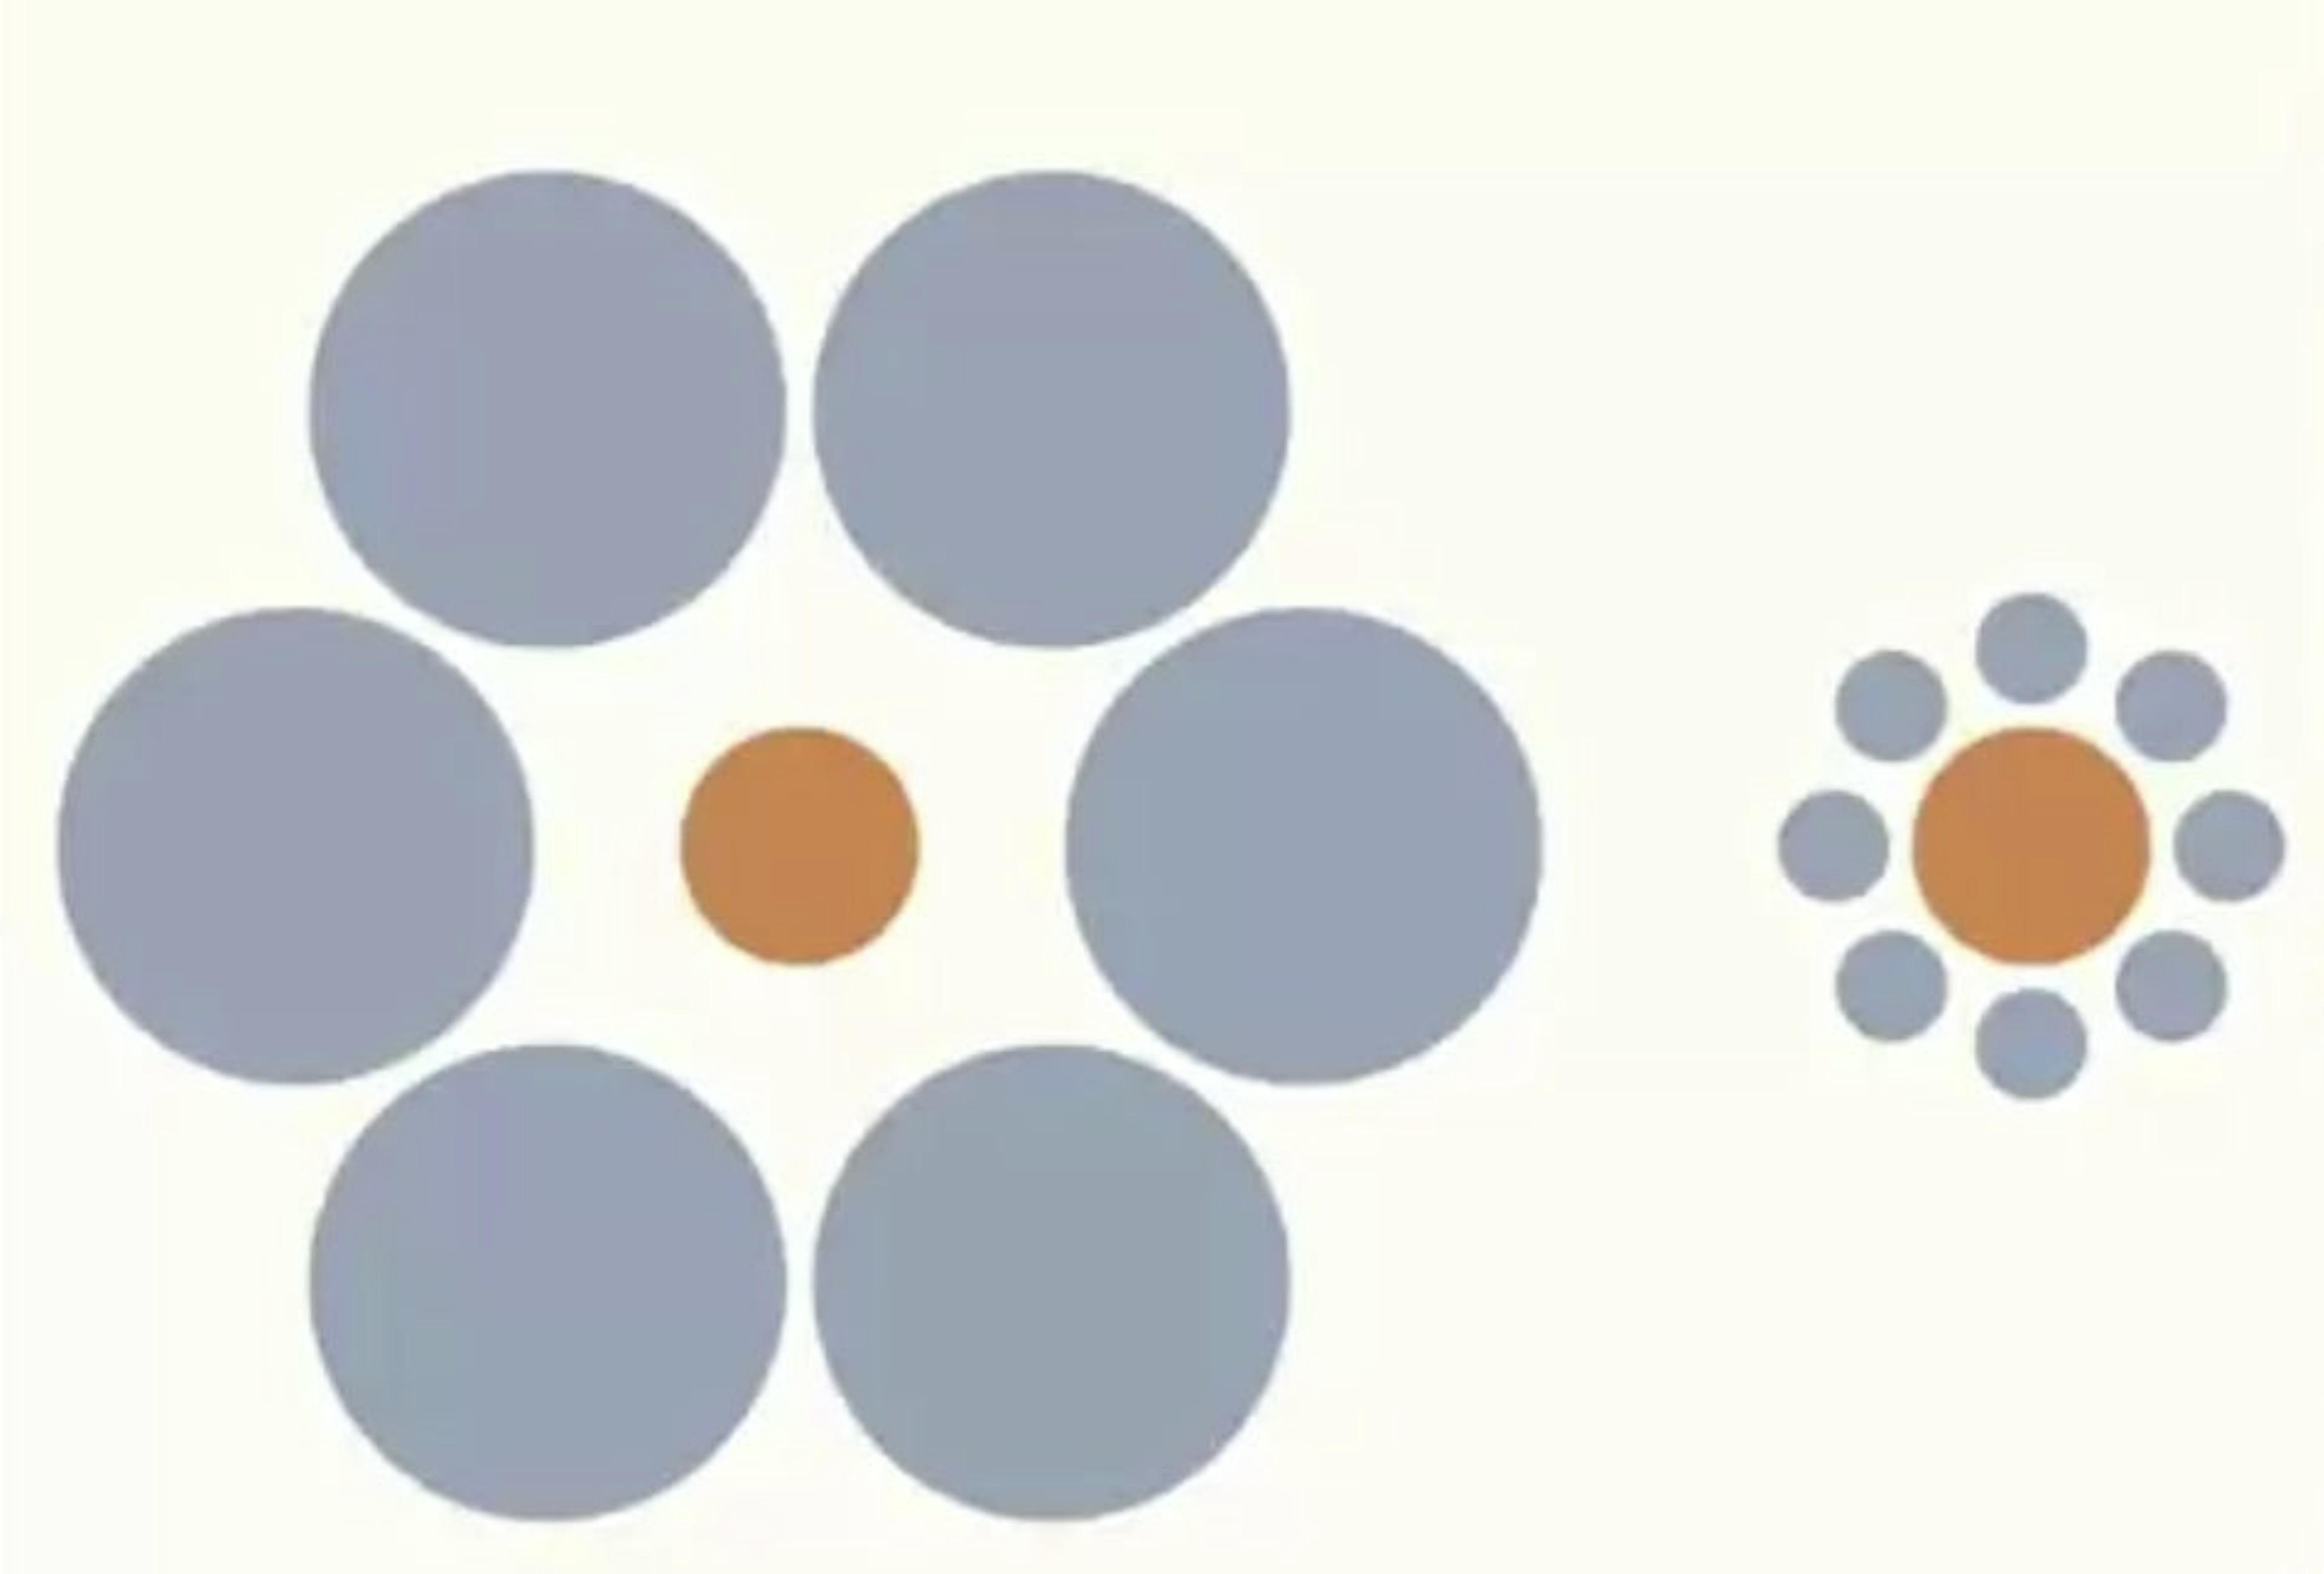 The Ebbinghaus illusion. Screenshot from Dr. Santos’ lecture on Coursera